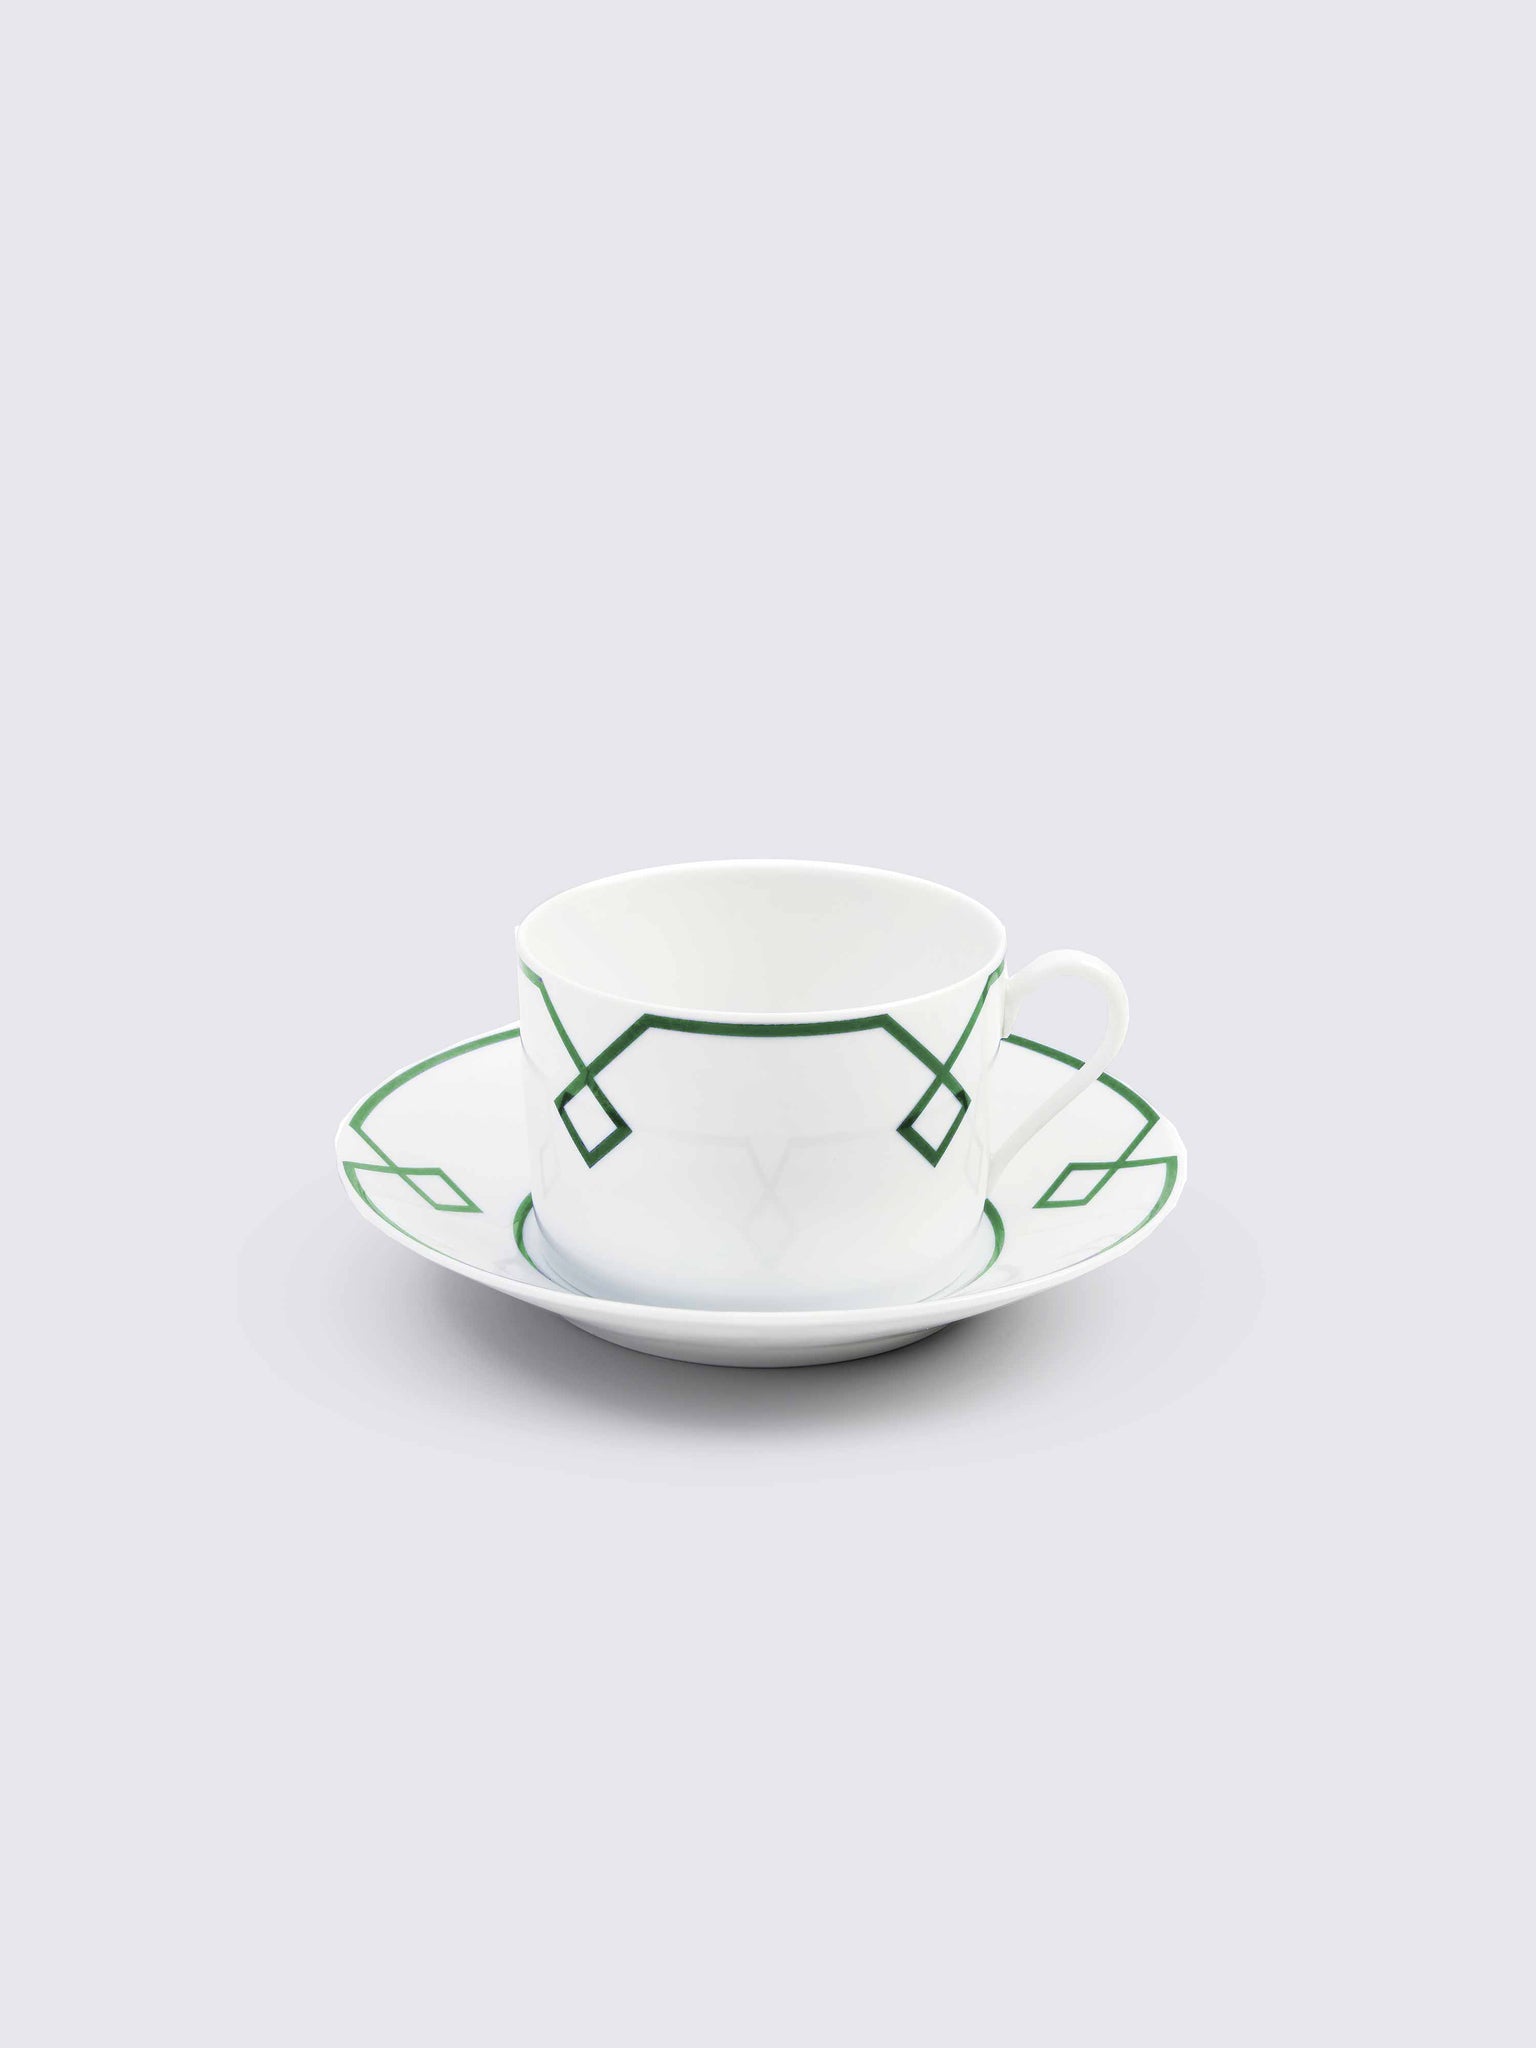 Naples Espresso Cup and Saucer Set with Green Geometric Border